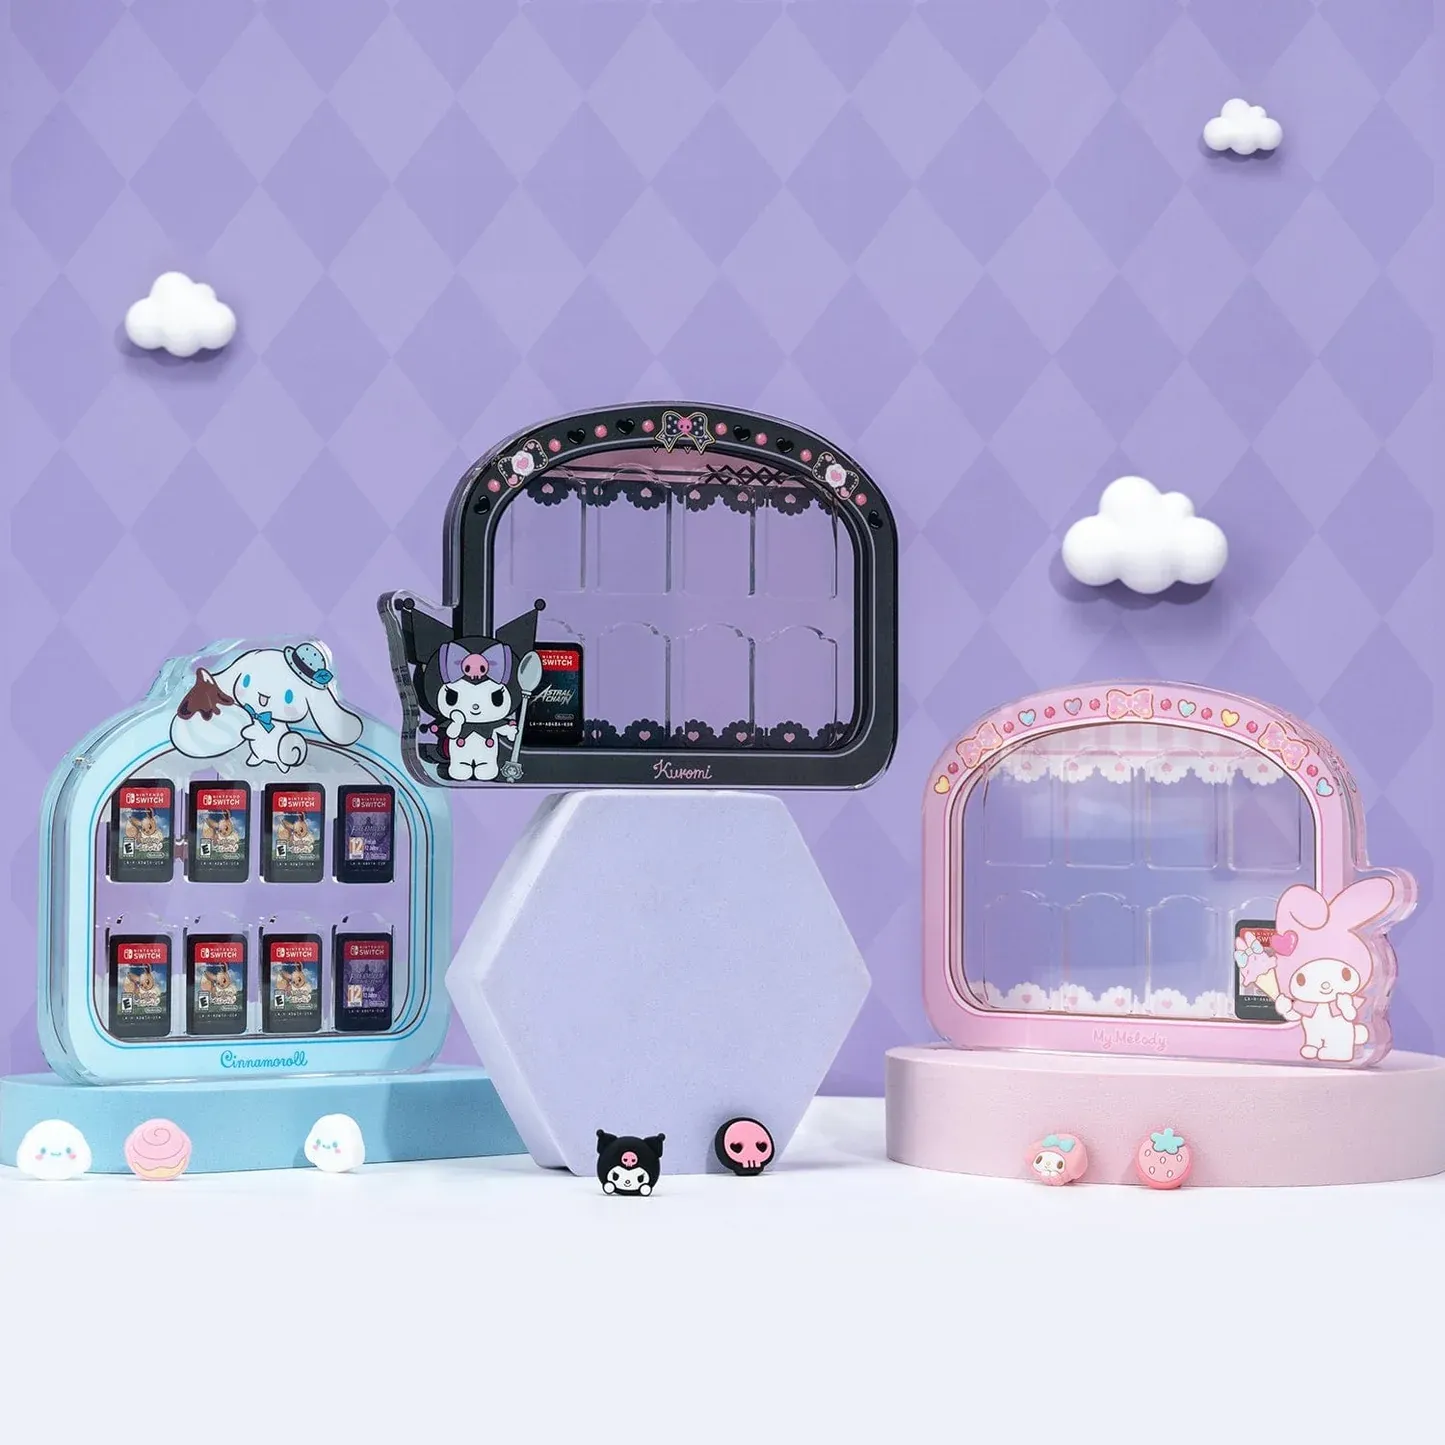 Geekshare’s Sanrio Collab Collection is now available in the US, and features a lot of Kuromi